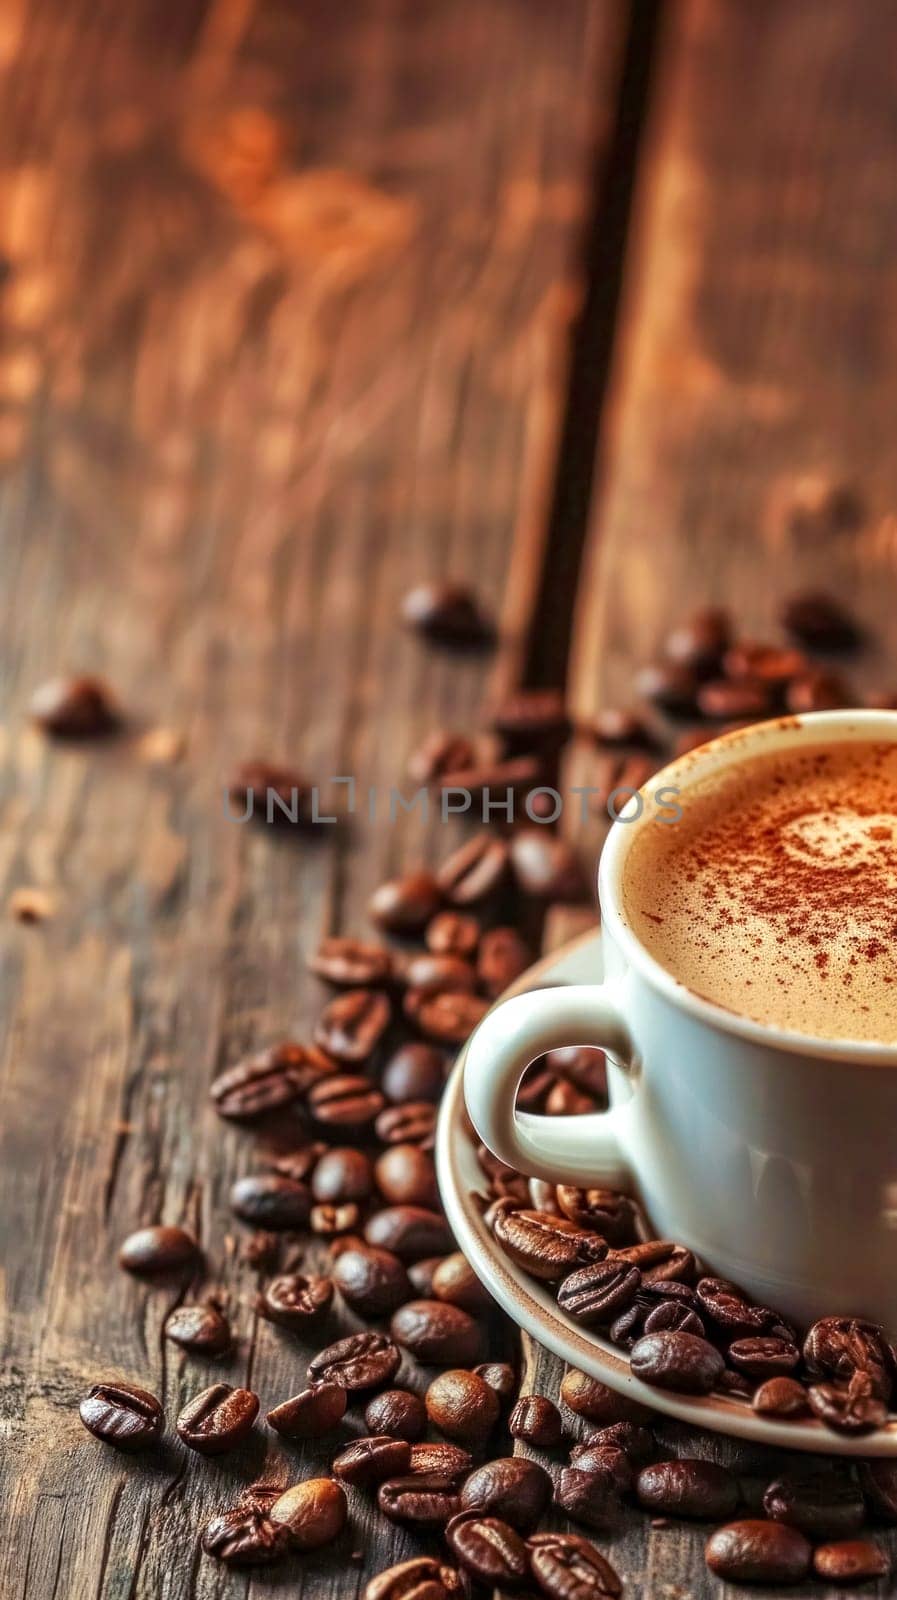 freshly brewed cup of coffee, creamy top, surrounded by a scatter of roasted coffee beans on a rustic wooden surface, conveying the rich aroma and comforting experience of enjoying a quality coffee.